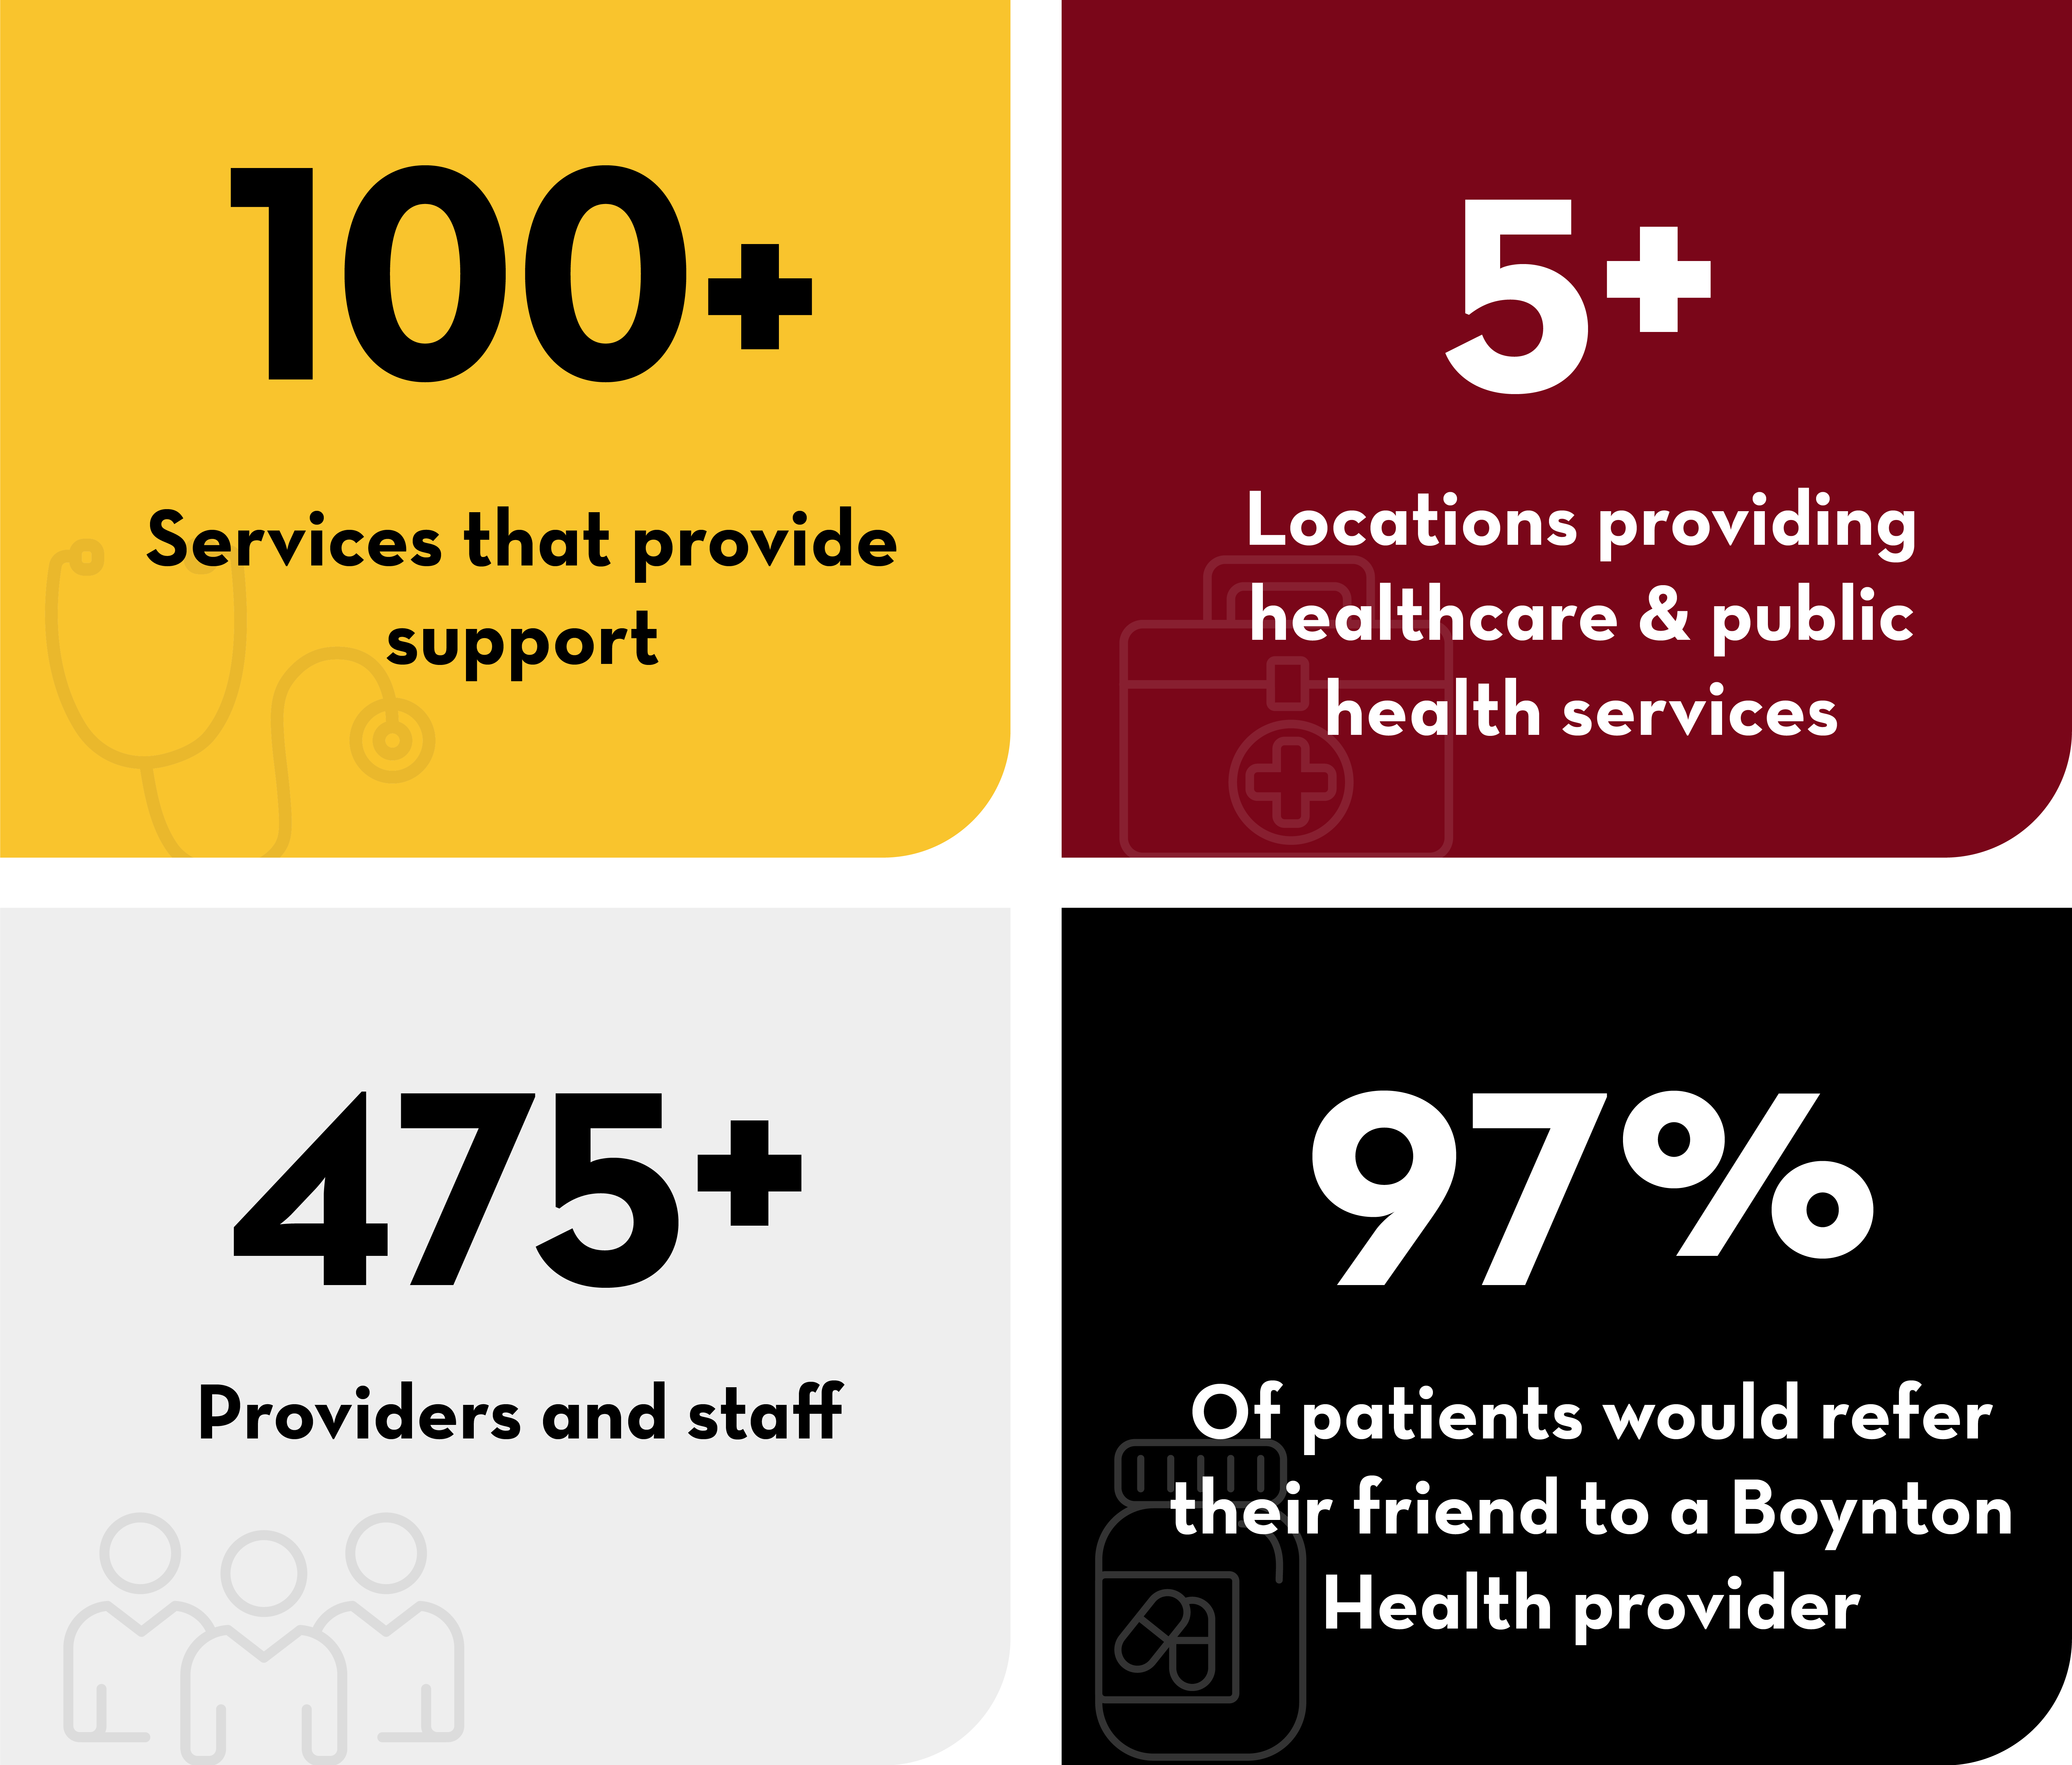 100+ Services that provide support. 5+ Locations providing healthcare & public health services. 475+ Providers and staff. 97% Of patients would refer their friend to a Boynton Health provider.